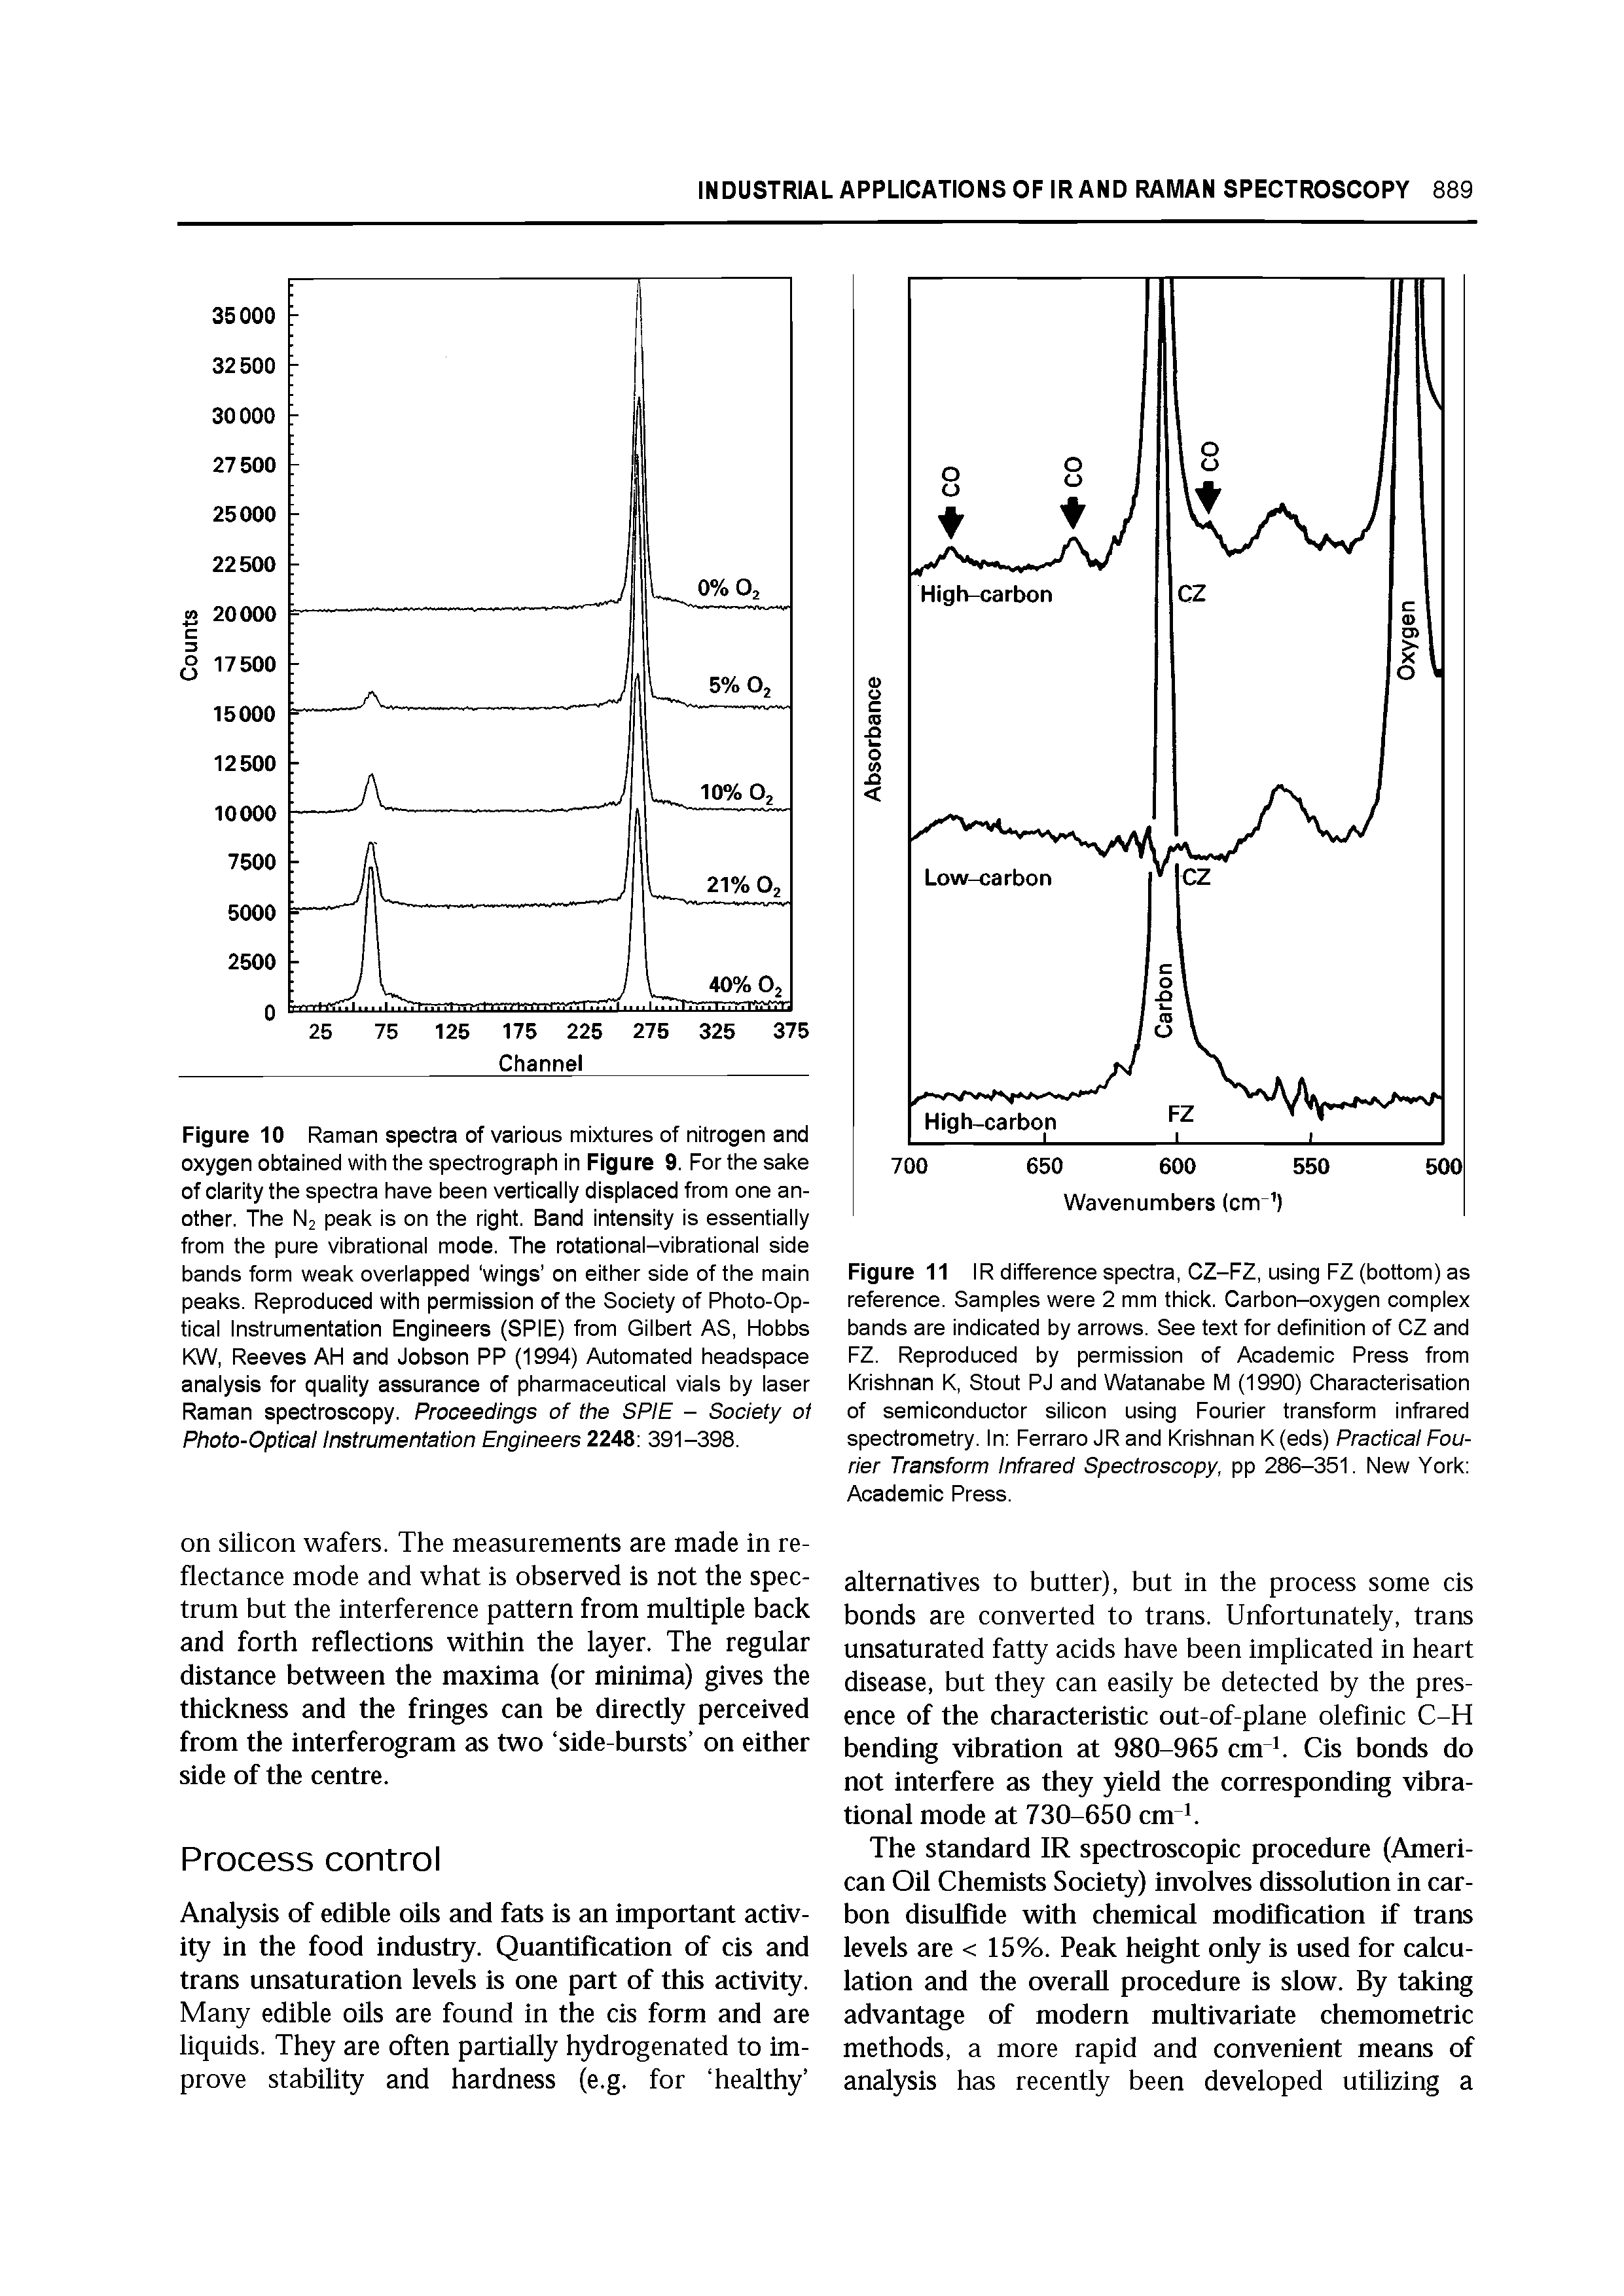 Figure 10 Raman spectra of various mixtures of nitrogen and oxygen obtained with the spectrograph in Figure 9. For the sake of clarity the spectra have been vertically displaced from one another. The N2 peak is on the right. Band intensity is essentially from the pure vibrational mode. The rotational-vibrational side bands form weak overlapped wings on either side of the main peaks. Reproduced with permission of the Society of Photo-Optical Instrumentation Engineers (SPIE) from Gilbert AS, Hobbs KW, Reeves AH and Jobson PP (1994) Automated headspace analysis for quality assurance of pharmaceutical vials by laser Raman spectroscopy. Proceedings of the SPIE - Society of Photo-Optical Instrumentation Engineers 2248 391-398.